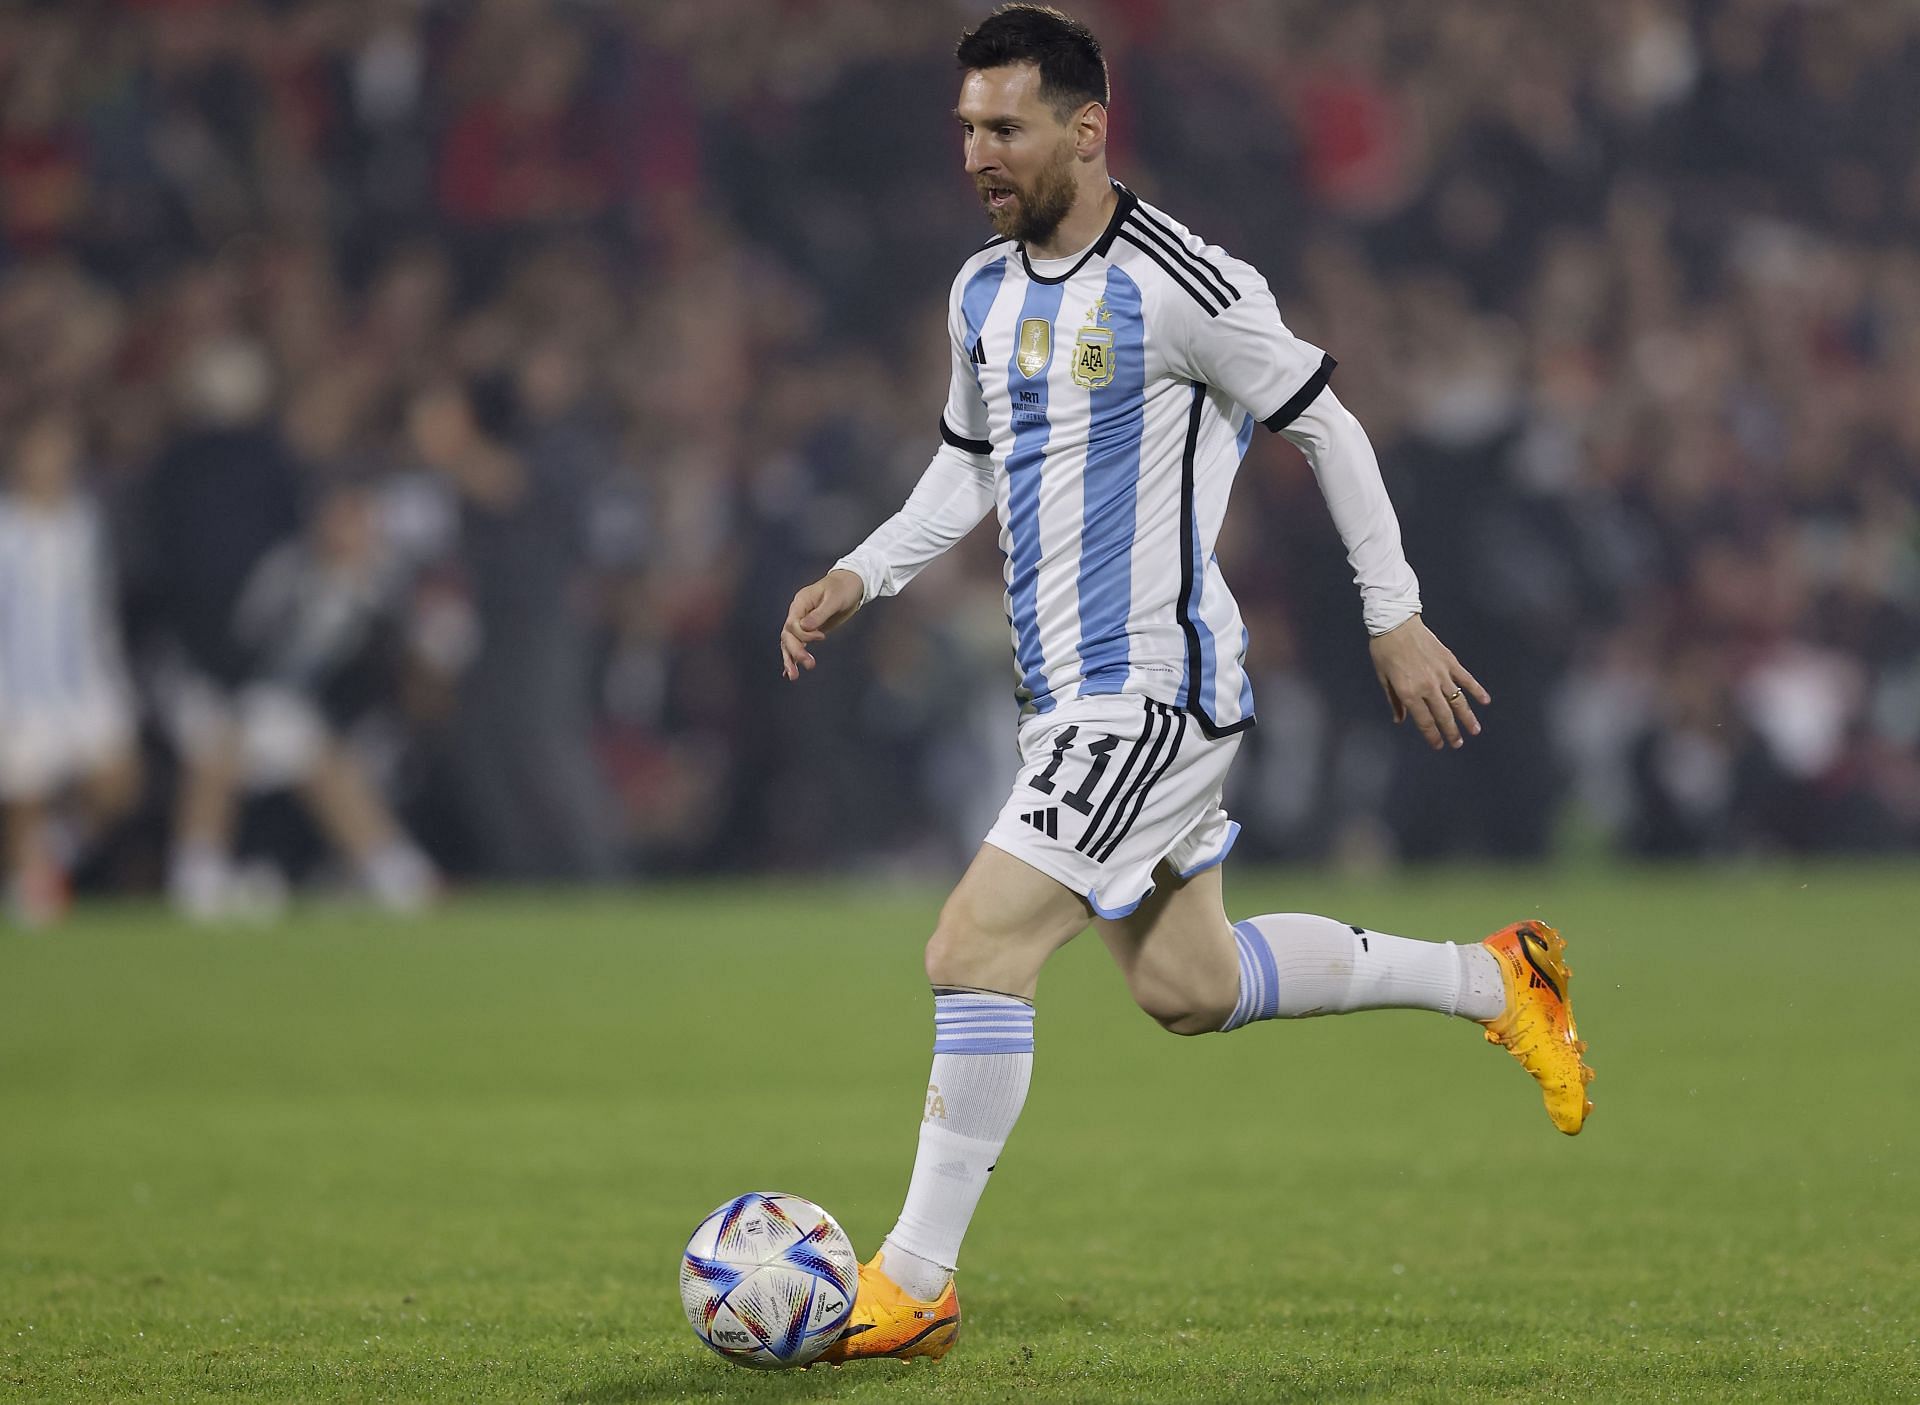 Lionel Messi in action for Argentina